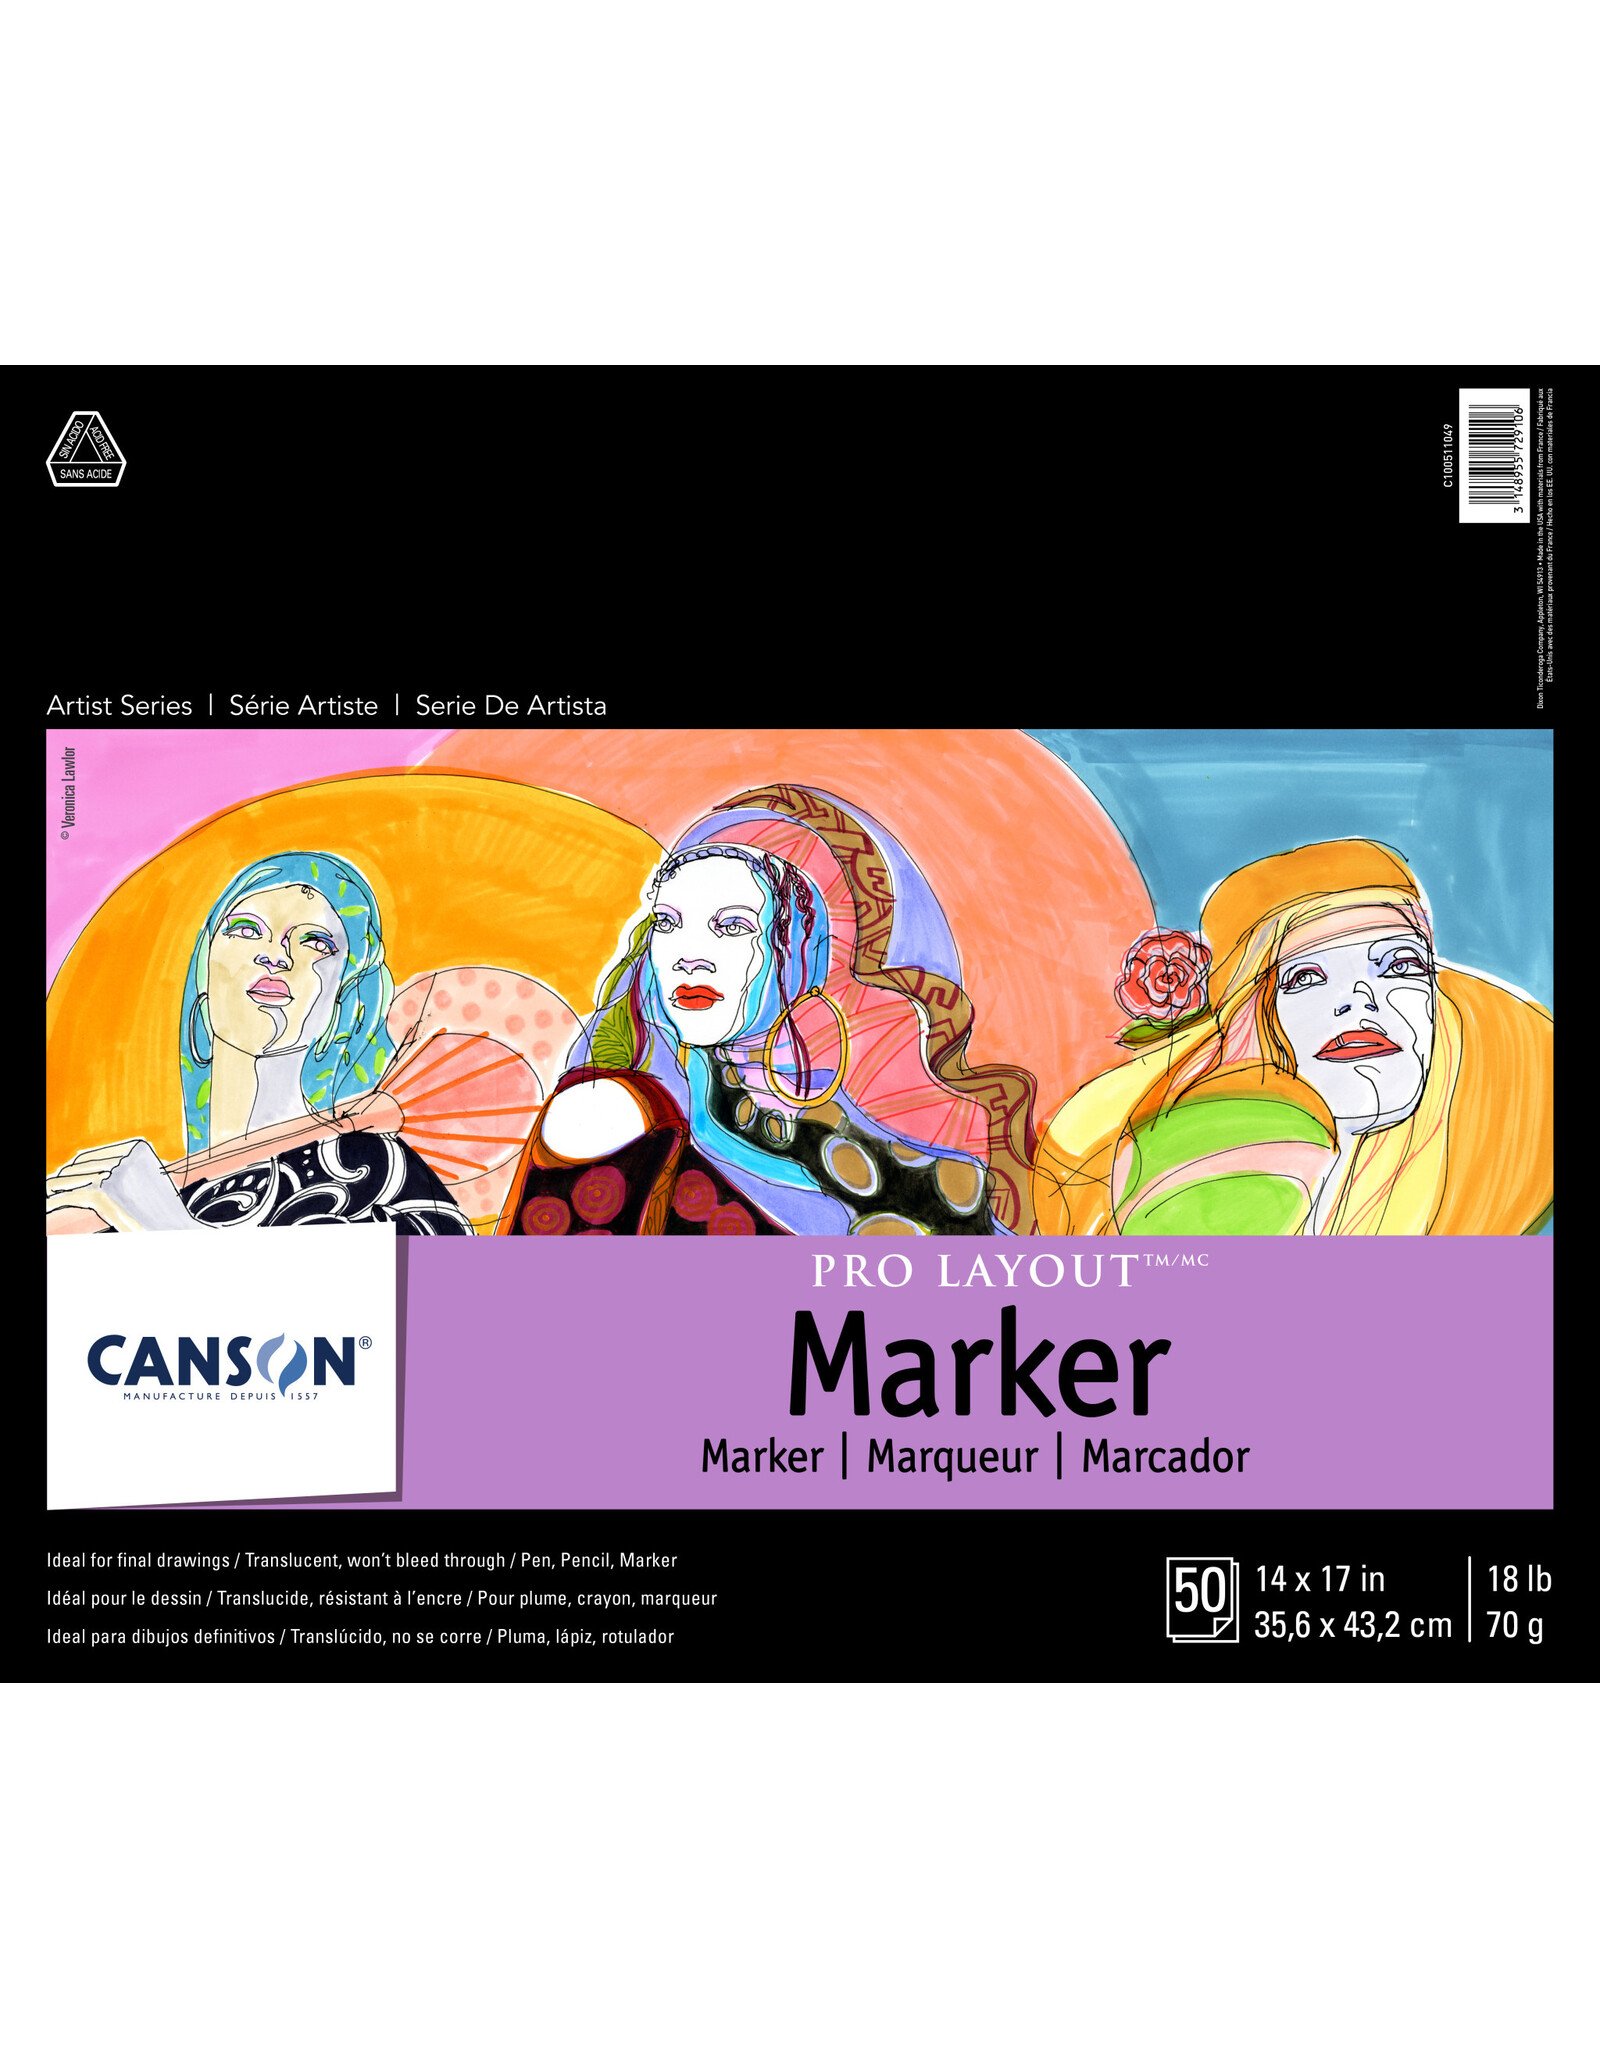 Canson Canson Pro Layout Marker Pad, 14" x 17", 50 Sheets